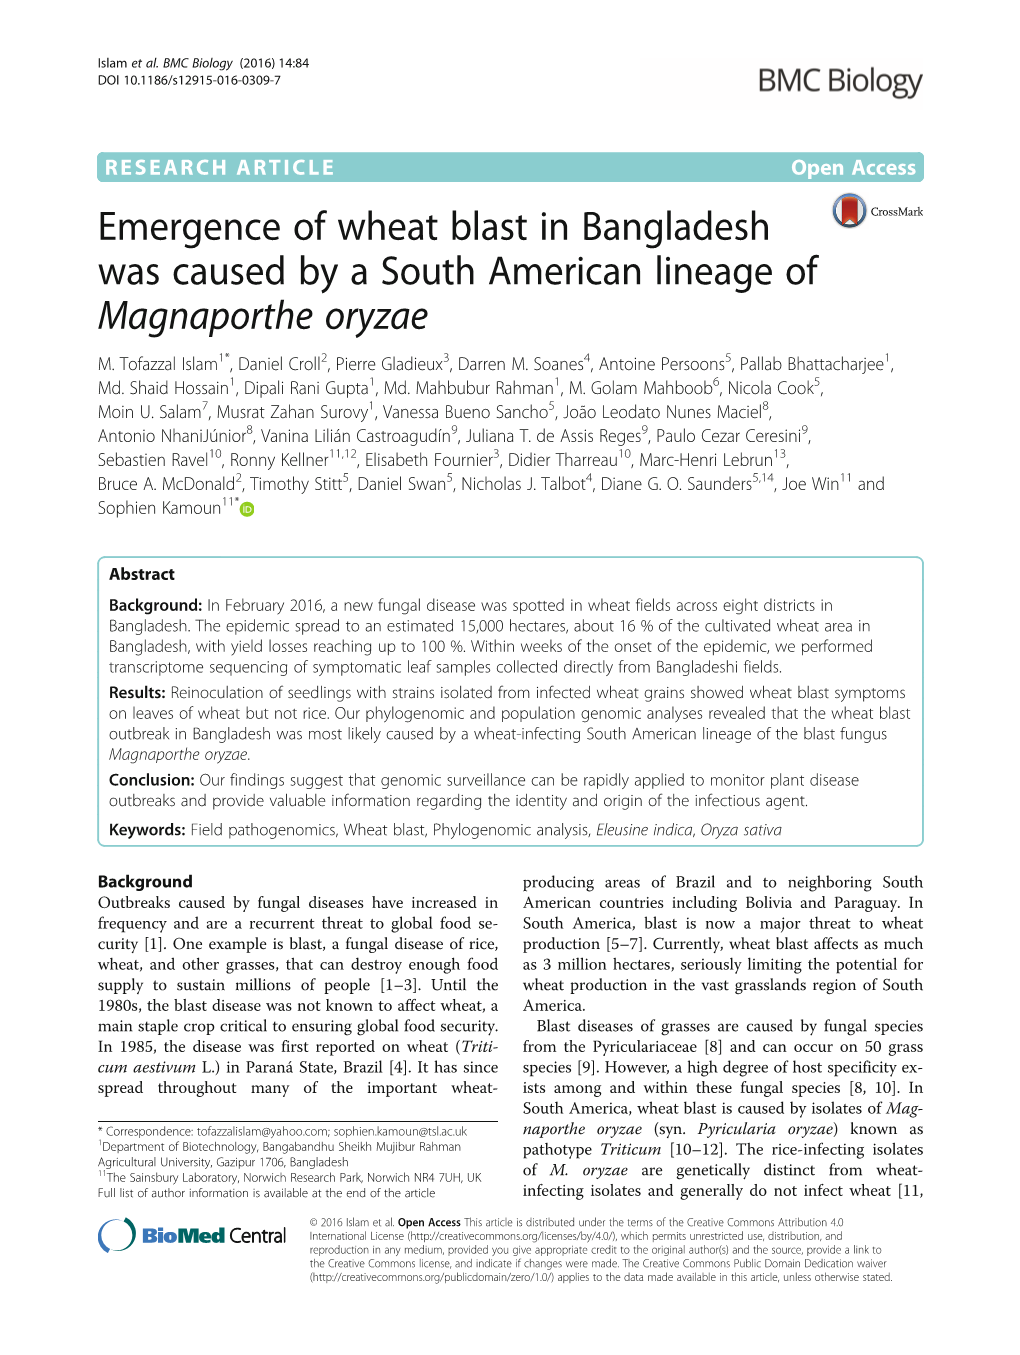 Emergence of Wheat Blast in Bangladesh Was Caused by a South American Lineage of Magnaporthe Oryzae M